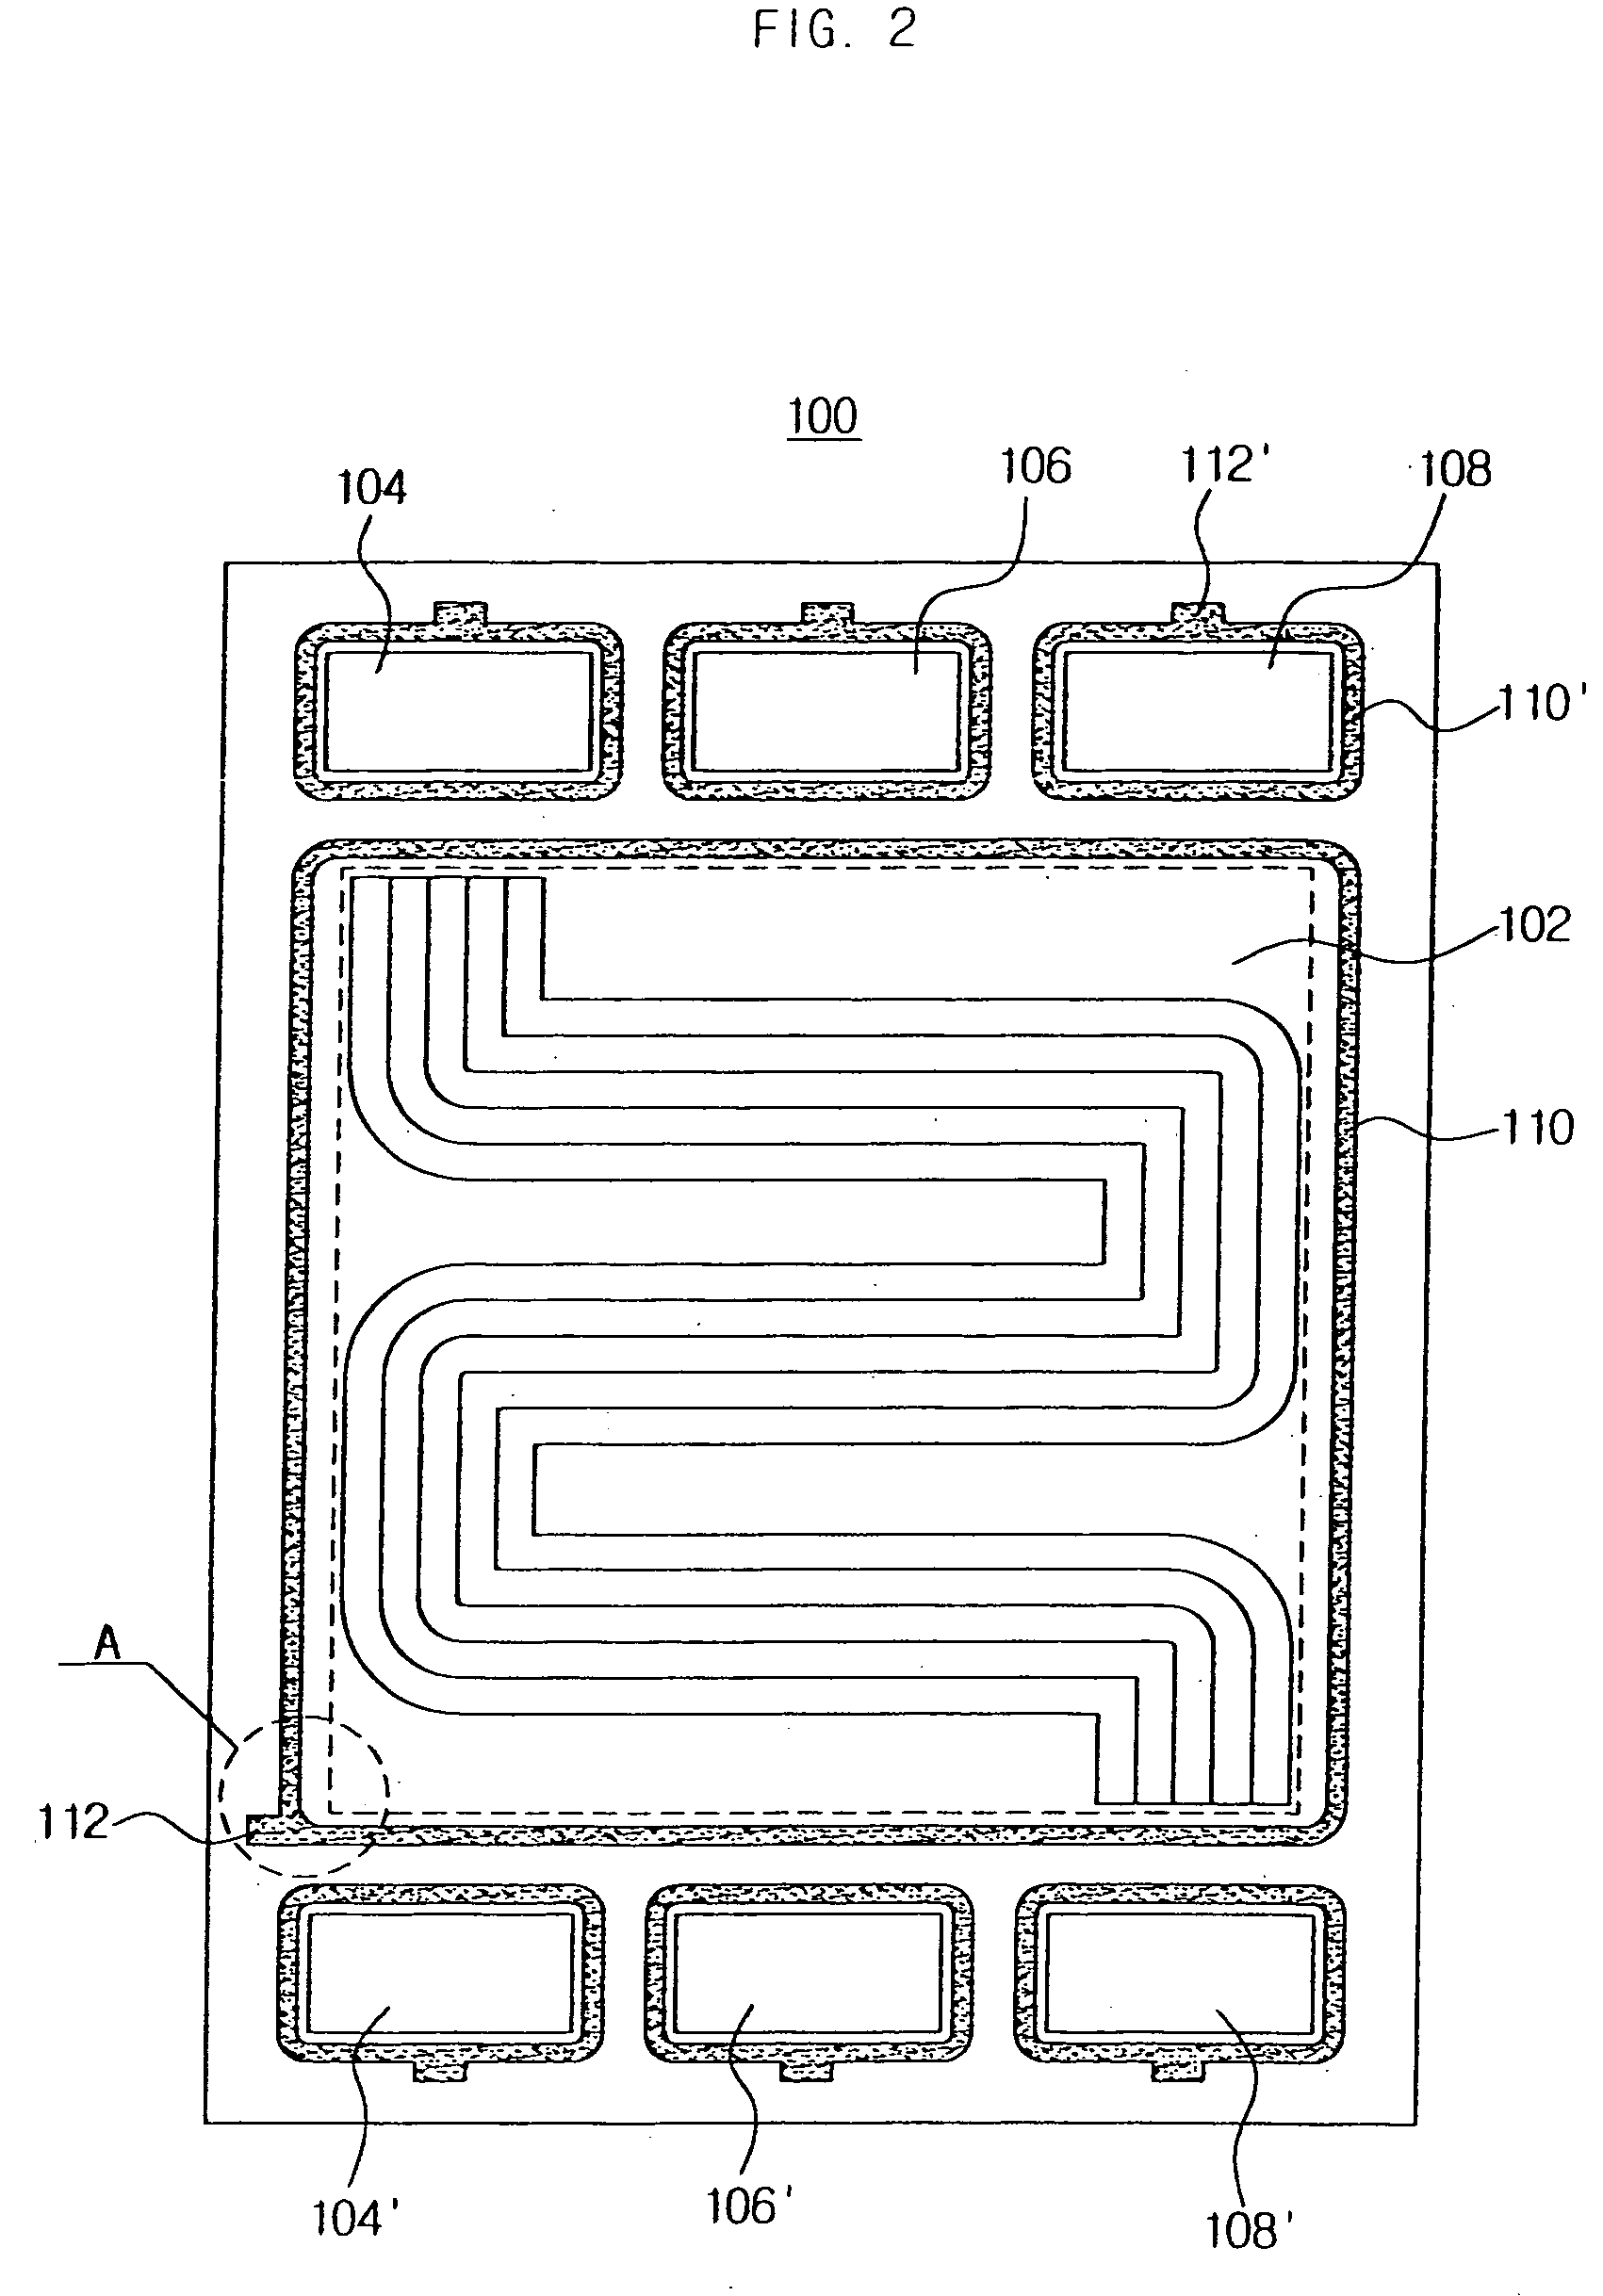 Sealing structure for polymer electrolyte fuel cell